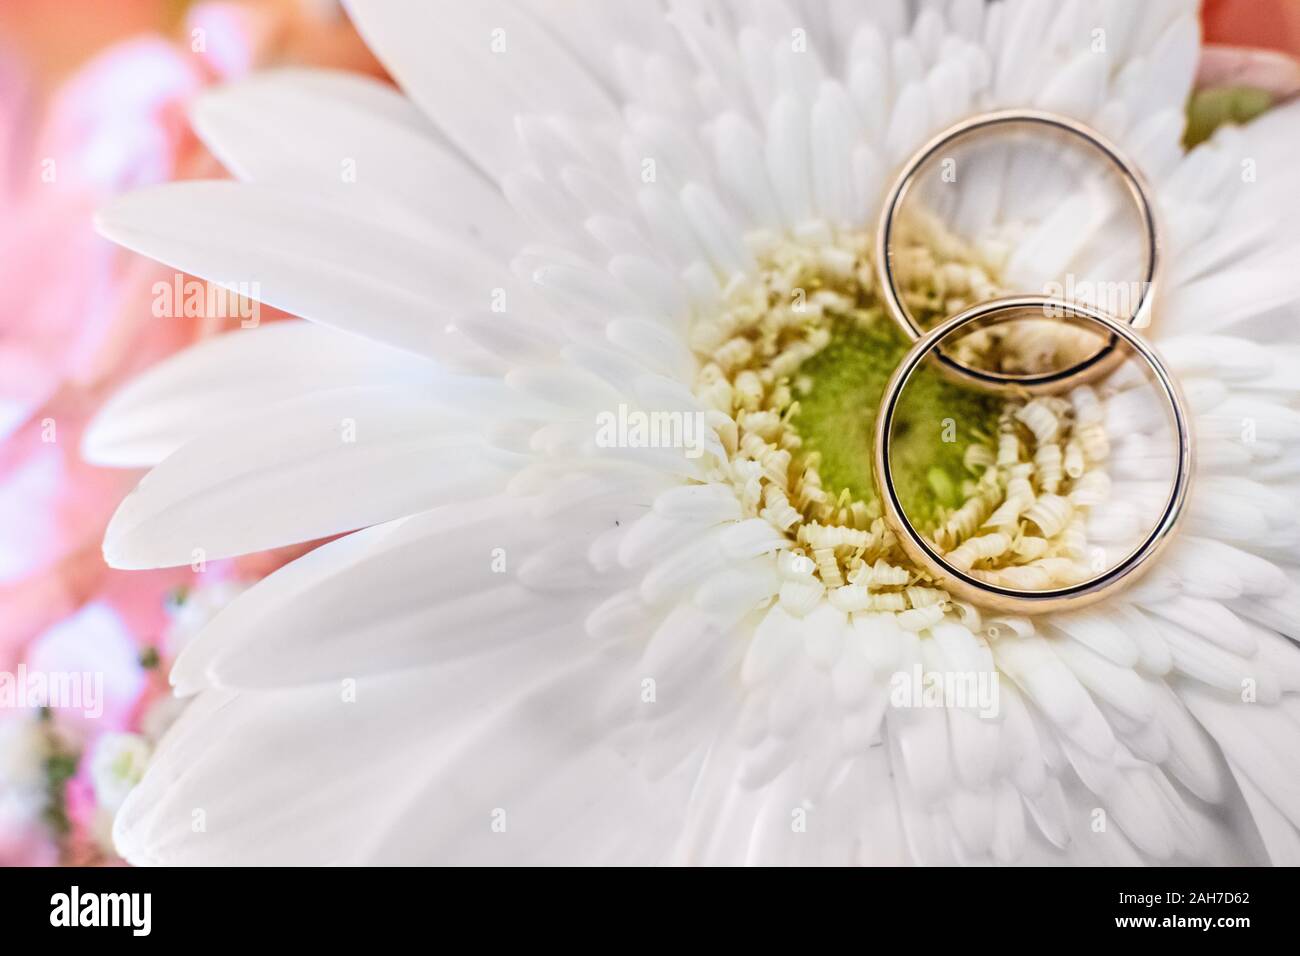 Two golden wedding rings lying on a white daisy blossom agains a pink bokeh background Stock Photo